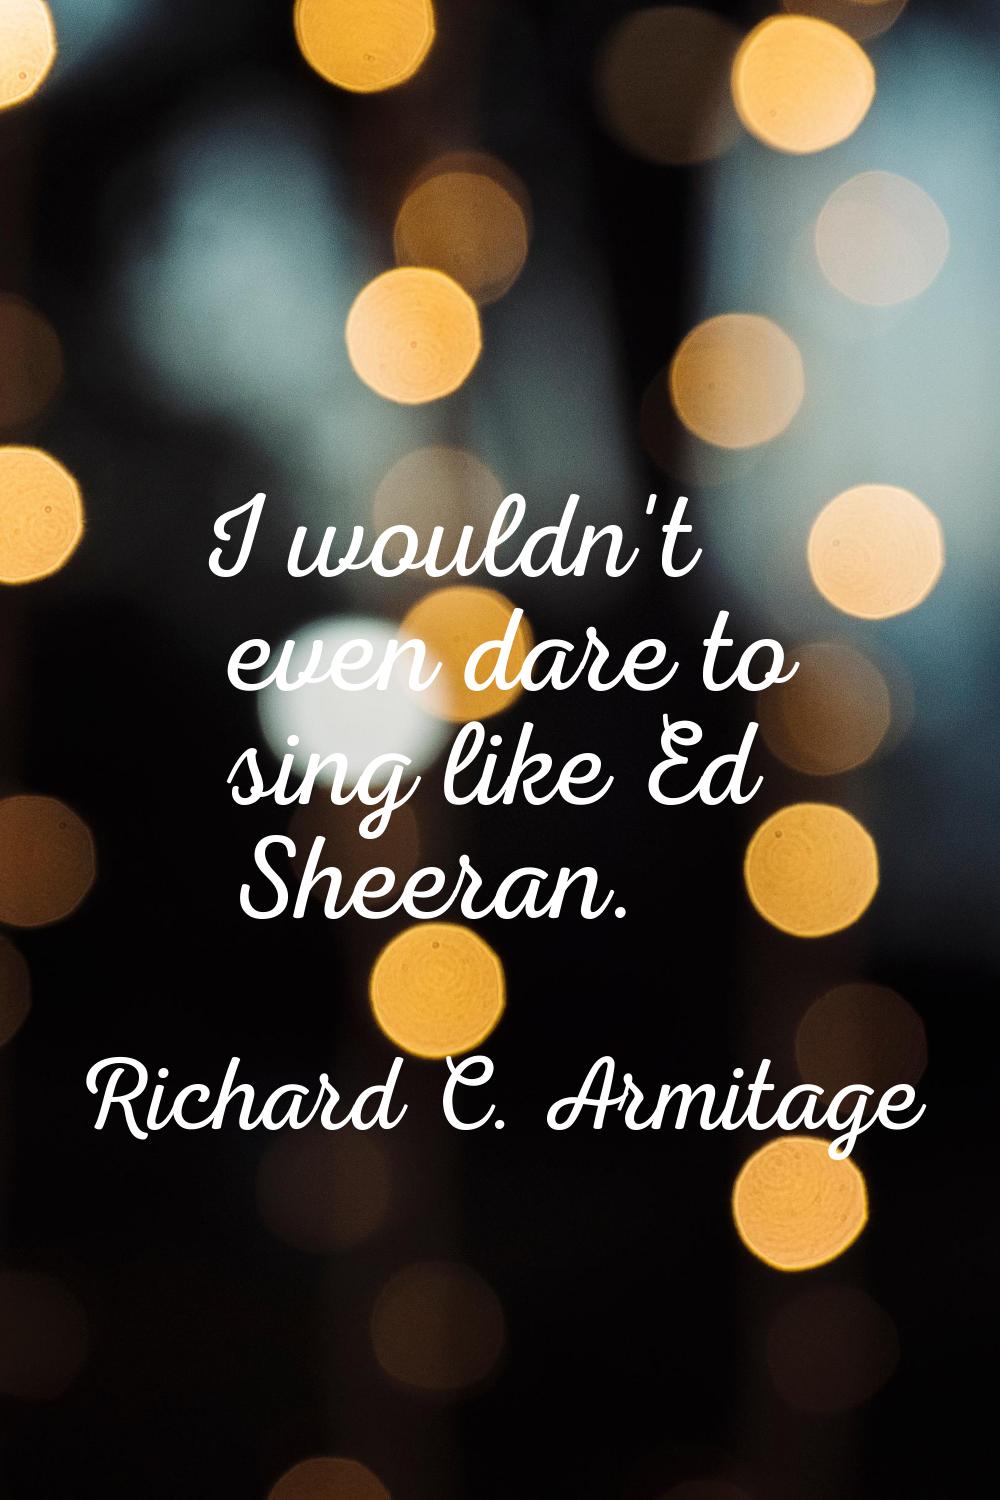 I wouldn't even dare to sing like Ed Sheeran.